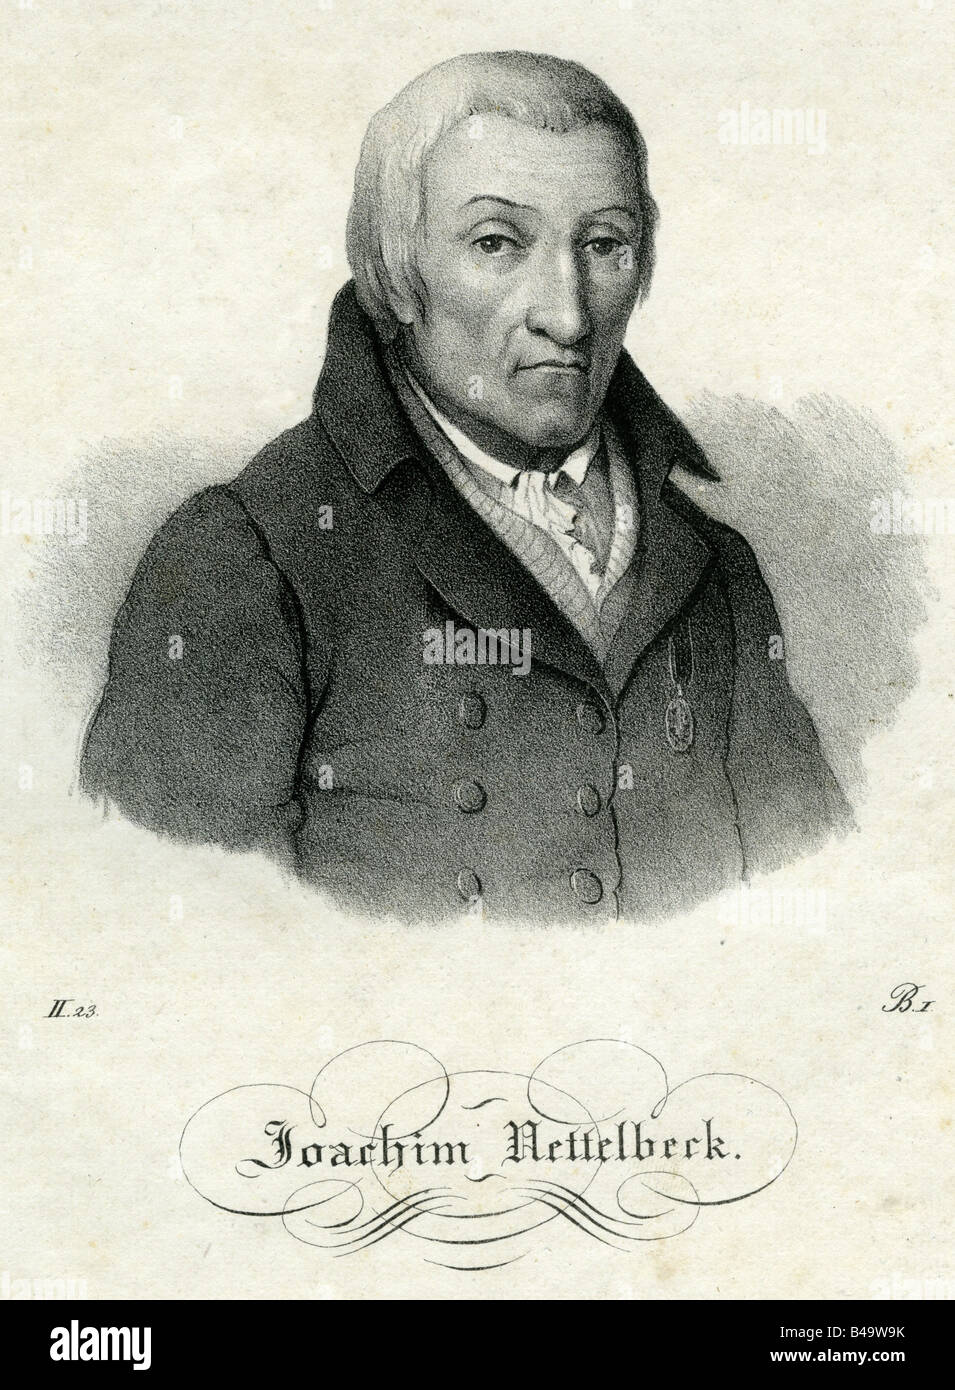 Nettelbeck, Joachim, 20.9.1738 - 29.1.1824, Prussian officer, portrait, lithograph, 19th century,  Germany, Prussia, 18th century, military, soldier, French Revolutionary Wars, siege of Kolberg 1807, , Stock Photo